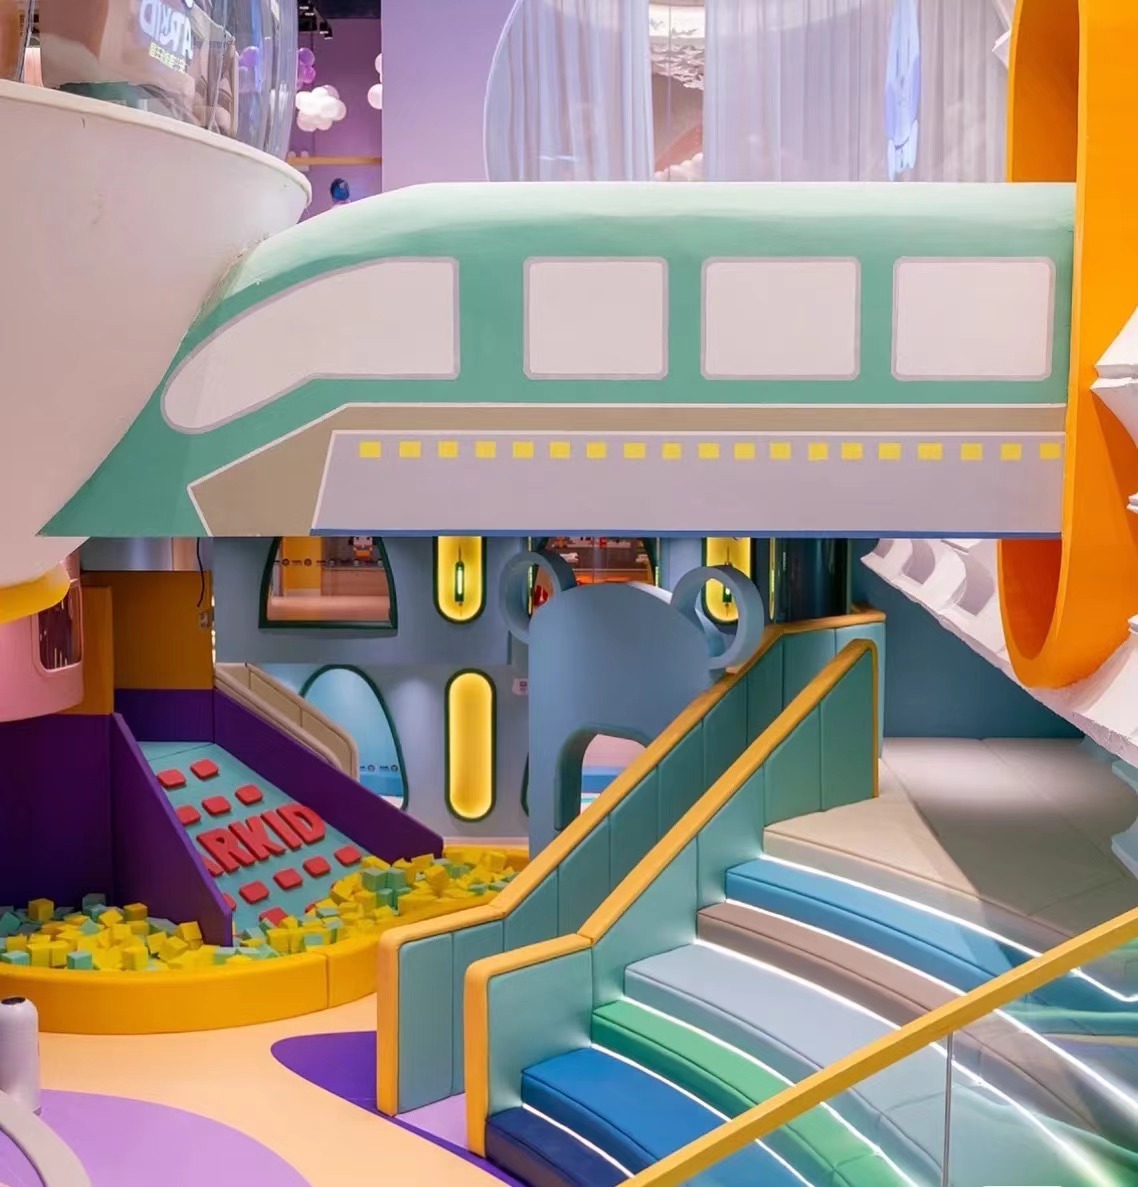 What pitfalls should novices avoid when opening indoor playground franchise stores?